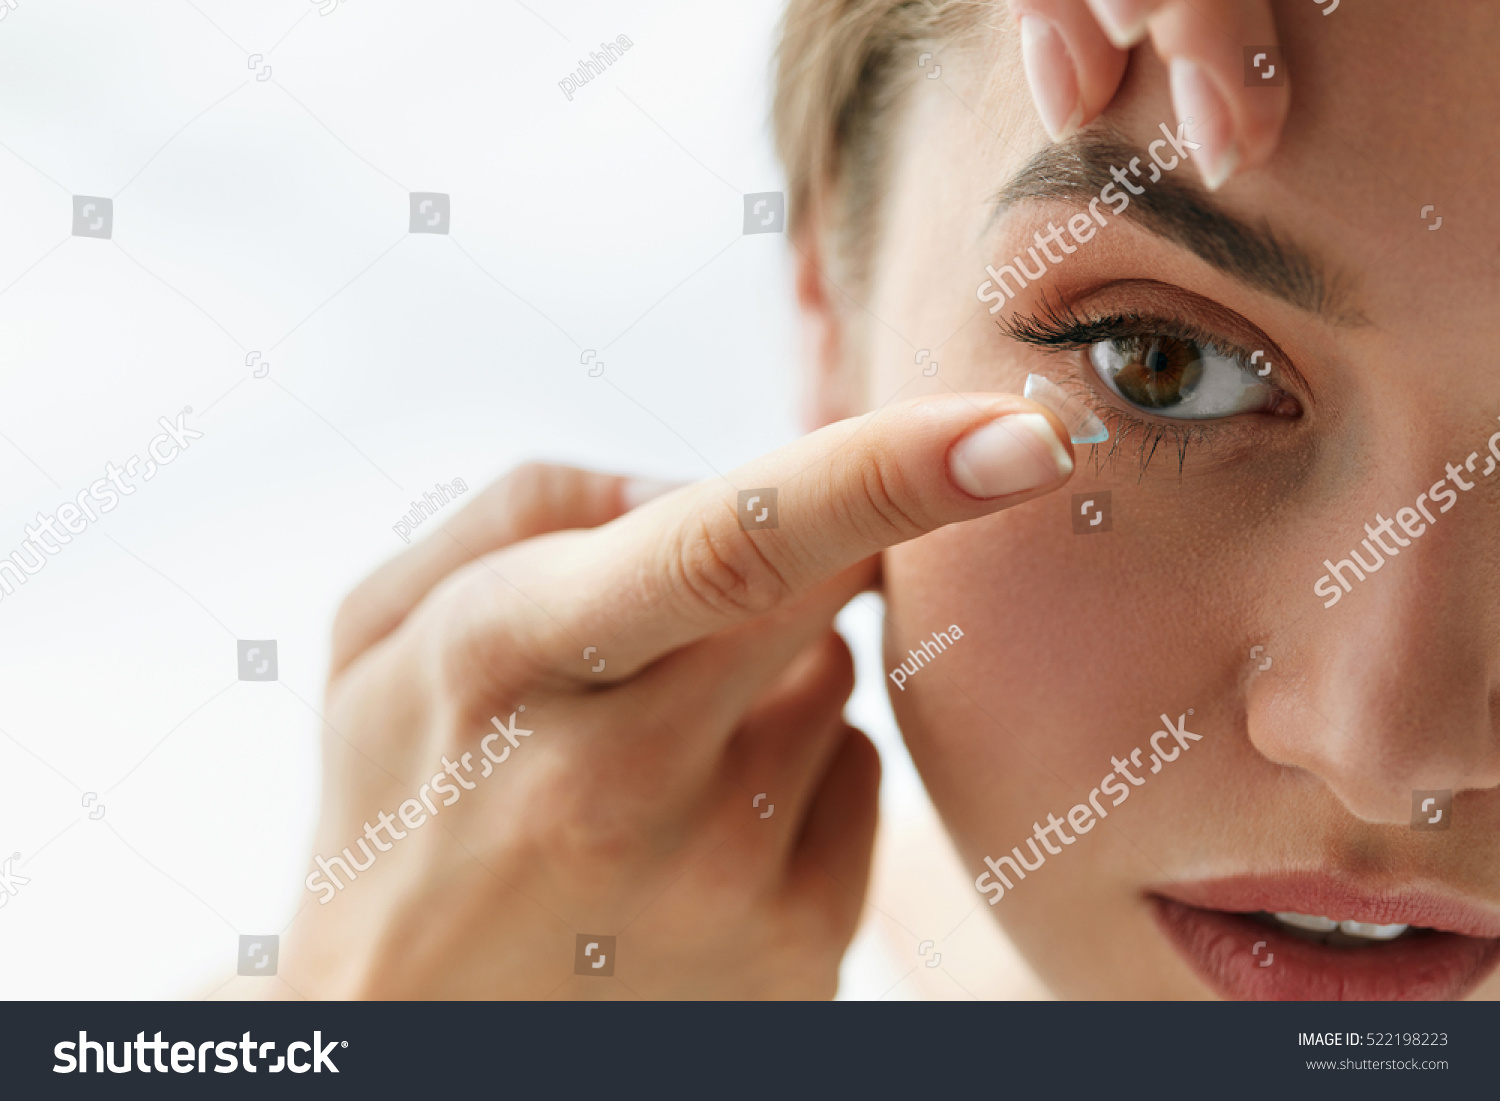 Contact Lens For Vision. Closeup Of Female Face With Applying Contact Lens On Her Brown Eyes. Beautiful Woman Putting Eye Lenses With Hands. Opthalmology Medicine And Health. High Resolution  #522198223